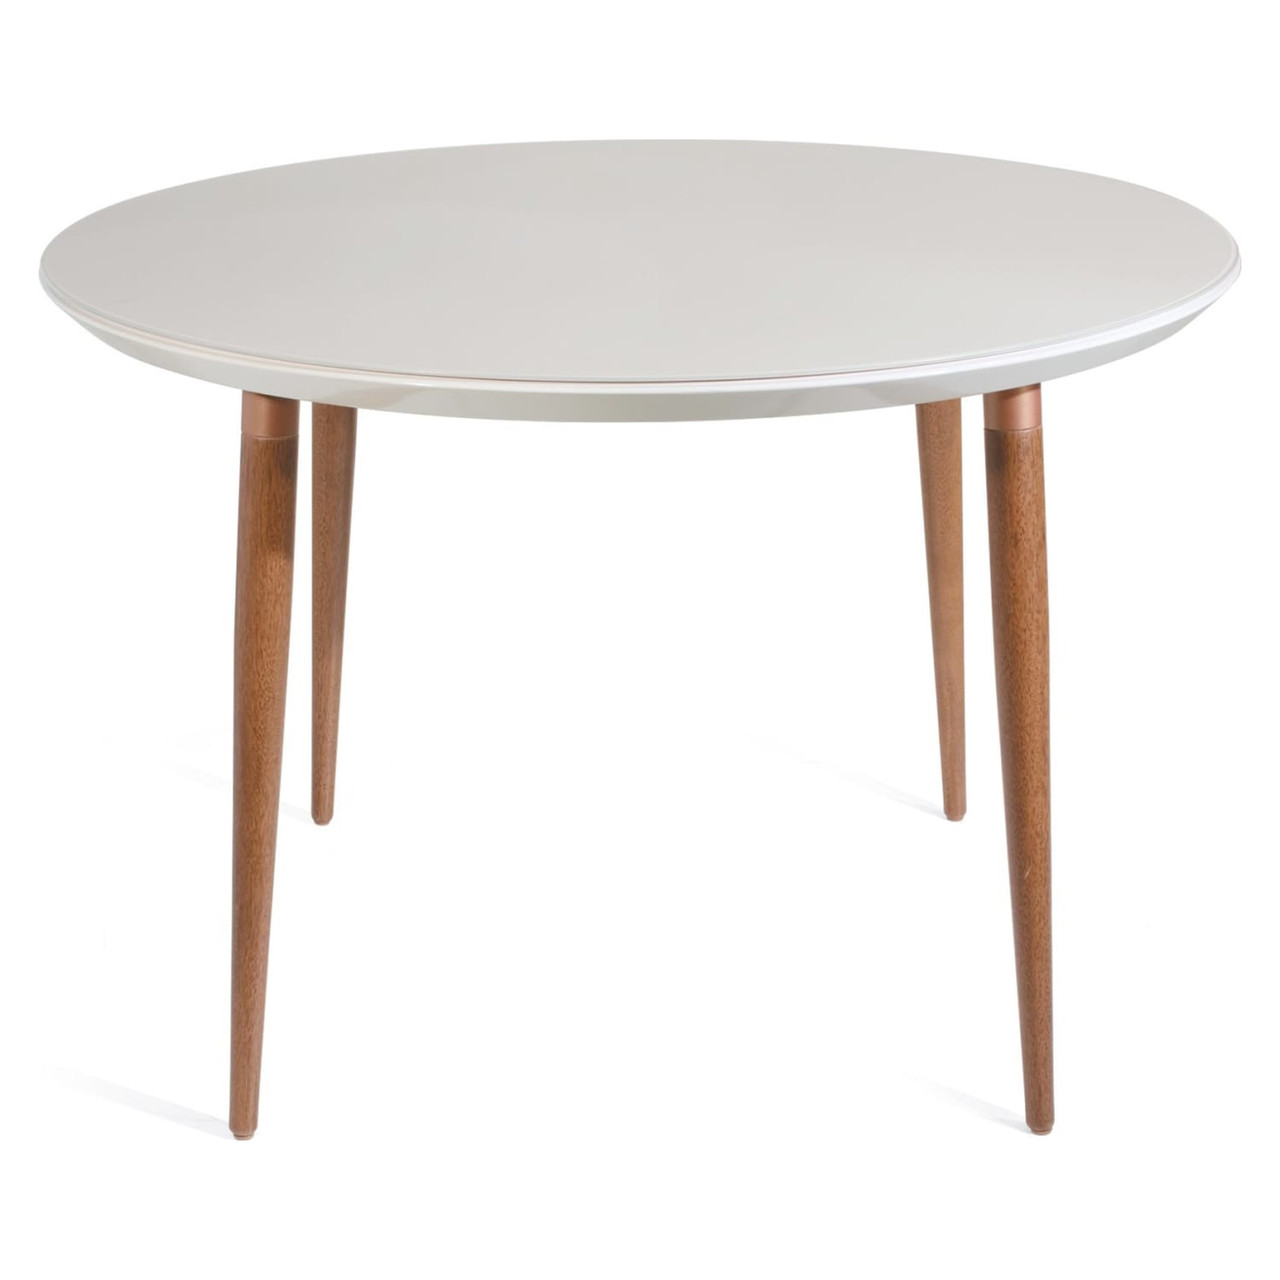 Utopia 45.28” Round Dining Table in Off White